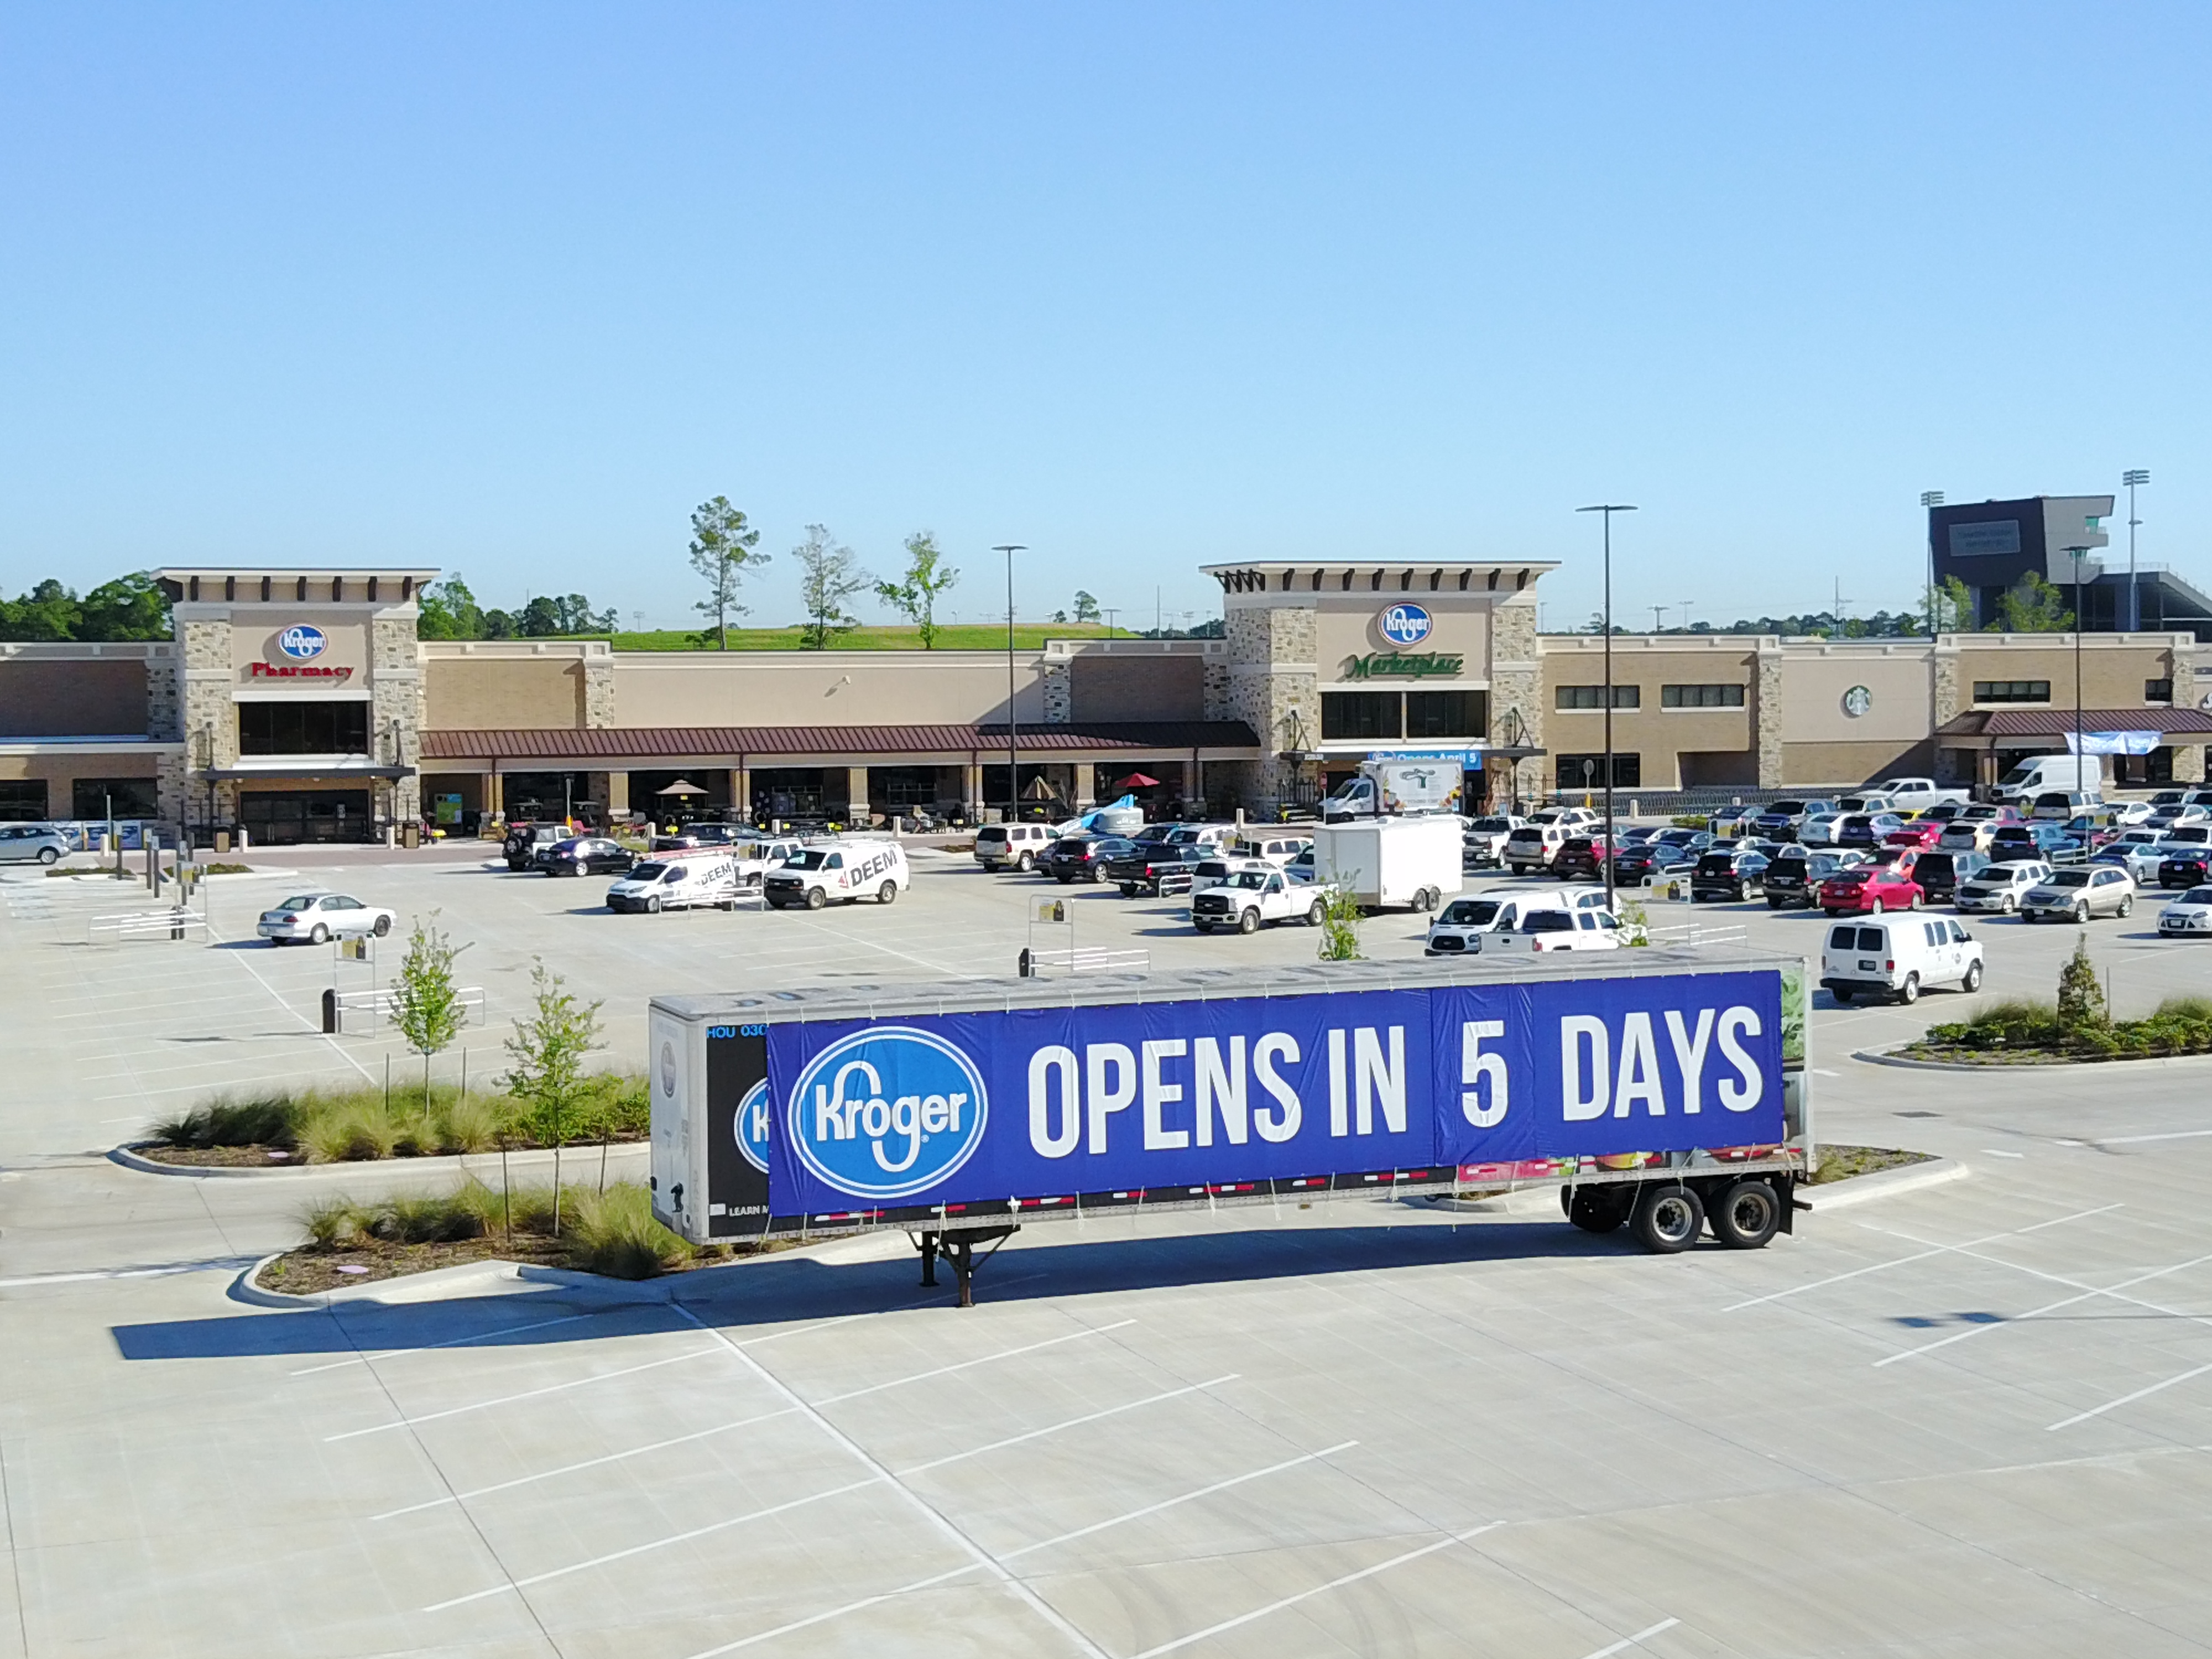 Sneak Peak to the Kroger Marketplace Opening on April 5th